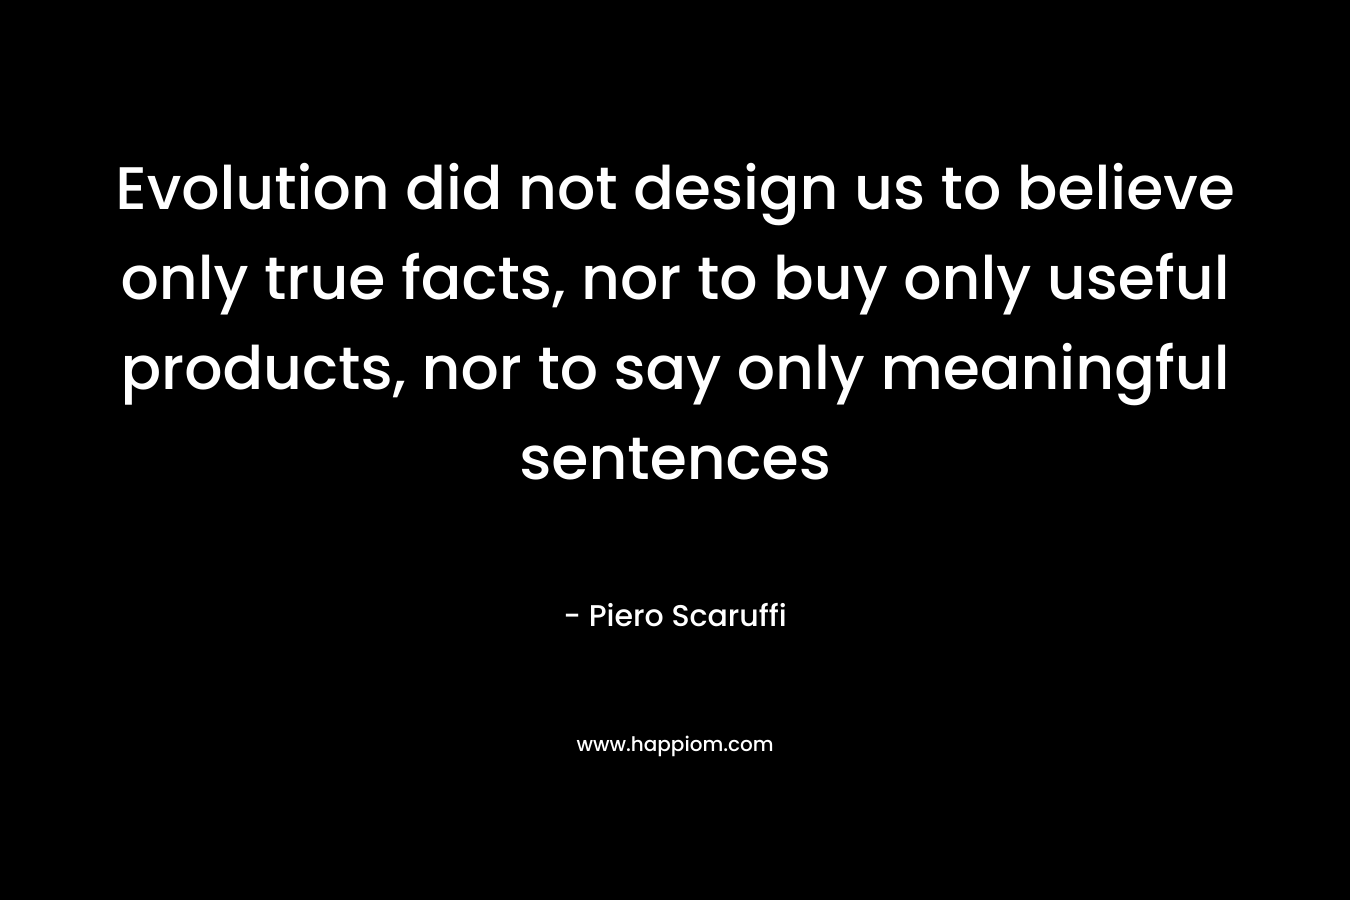 Evolution did not design us to believe only true facts, nor to buy only useful products, nor to say only meaningful sentences